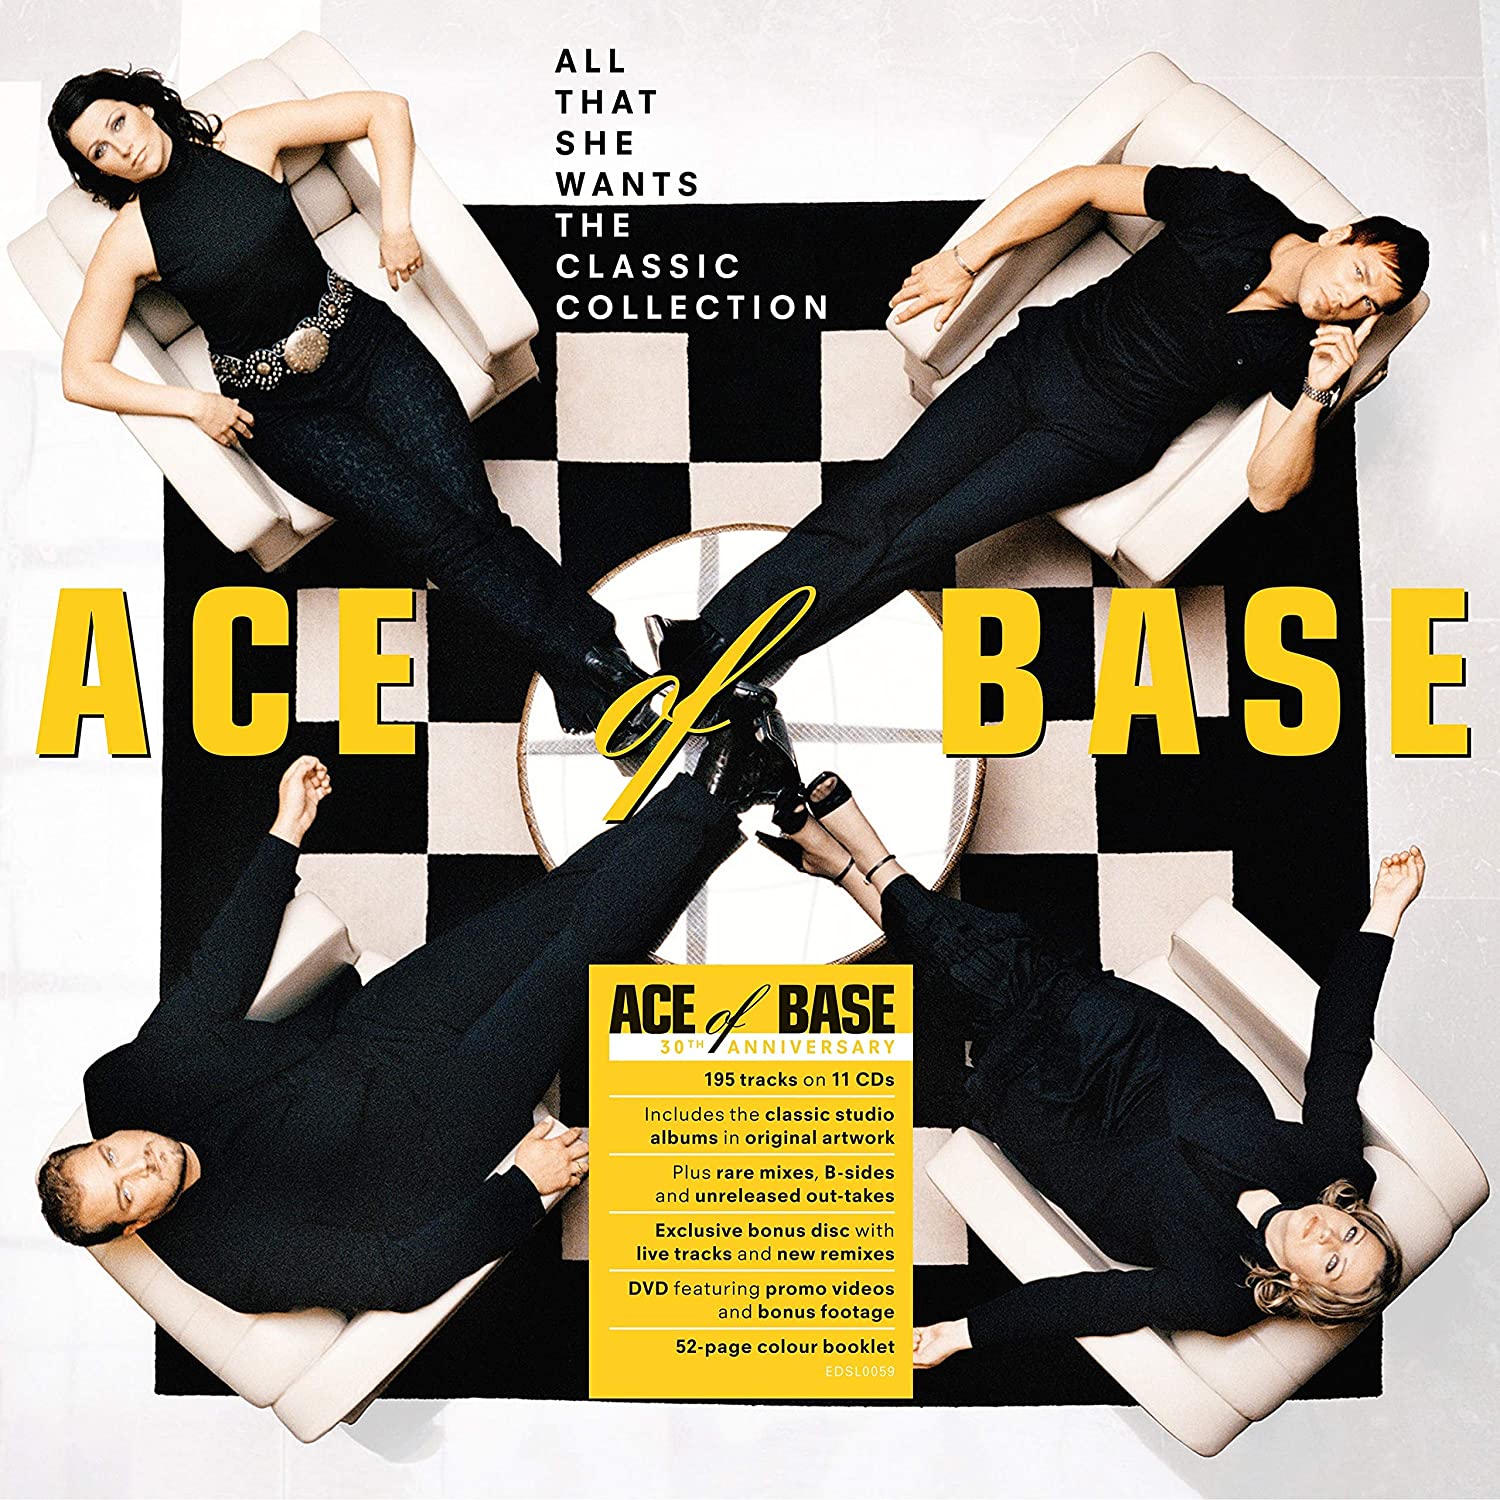 Ace of Base (에이스 오브 베이스) - All That She Wants (The Classic Collection) 